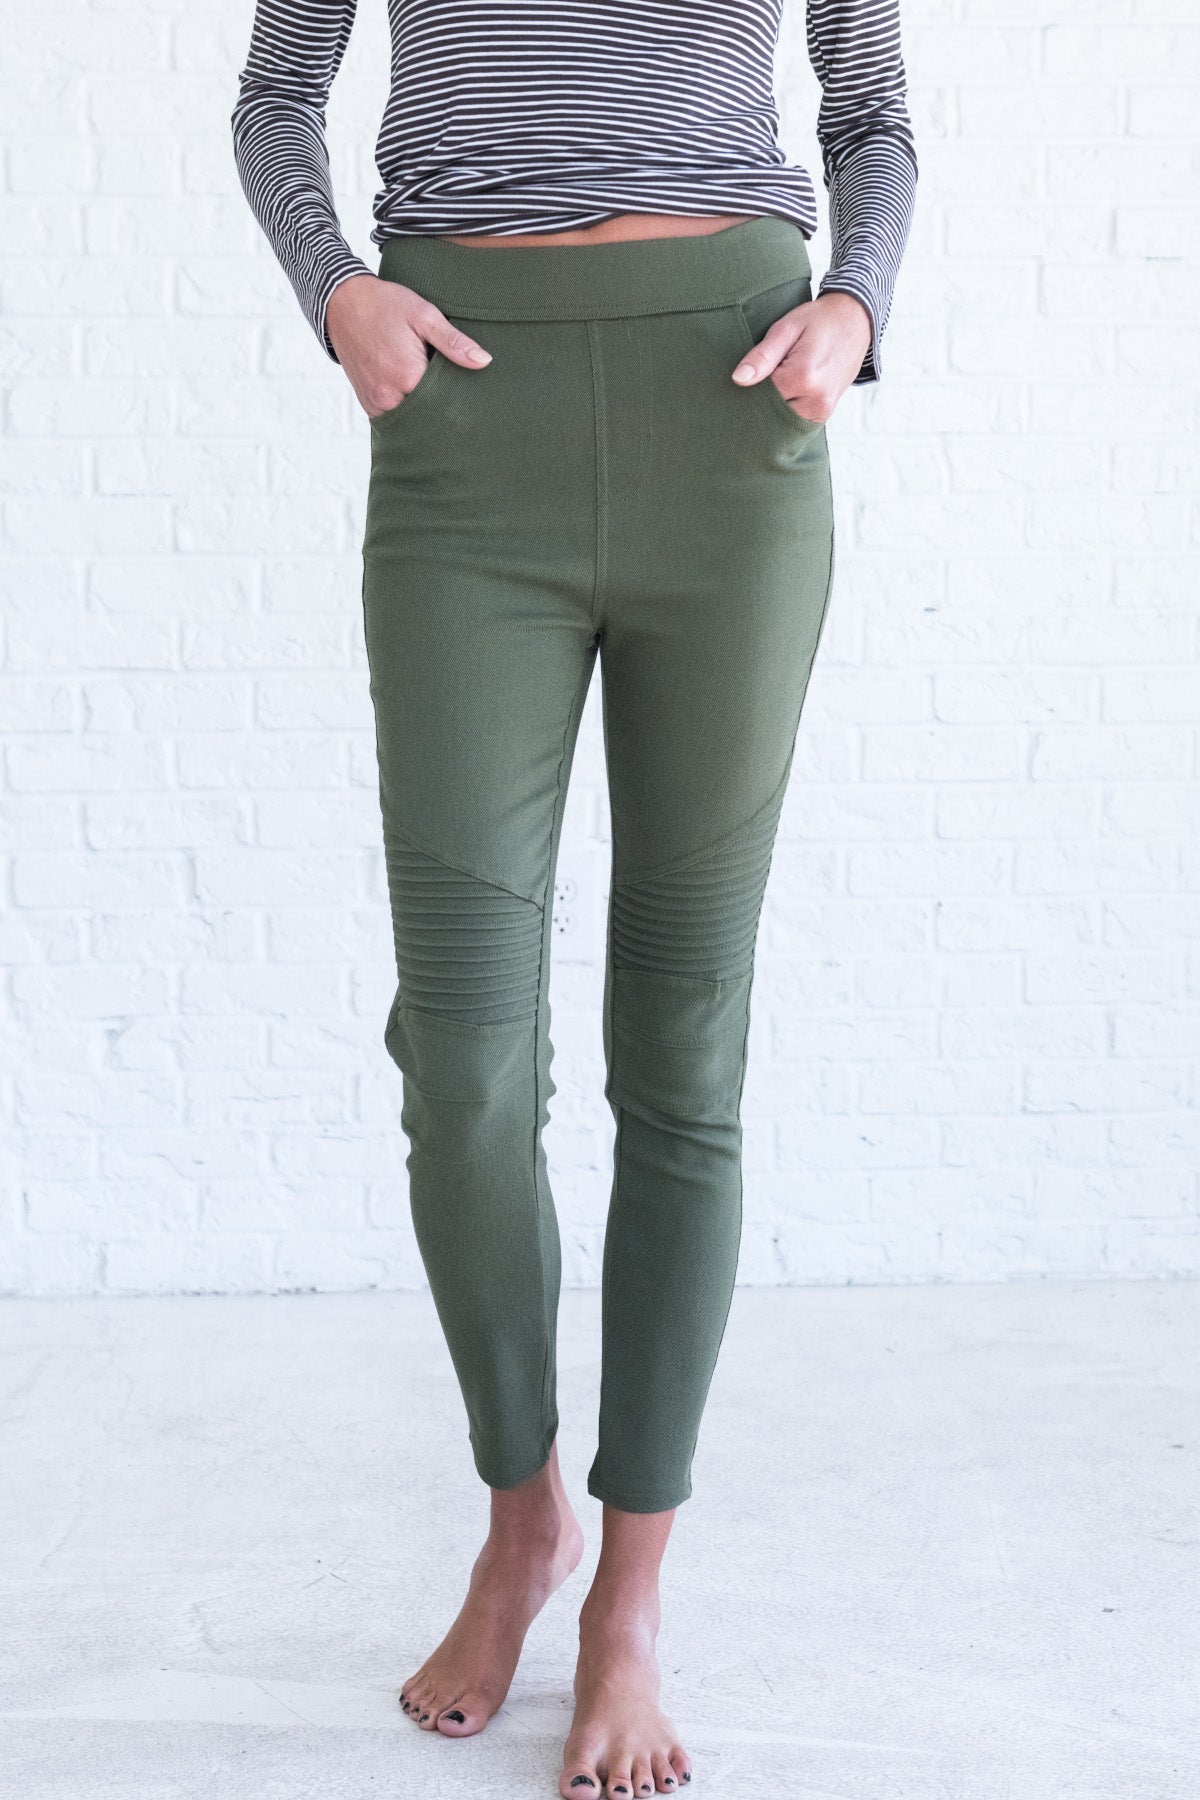 olive jeggings womens